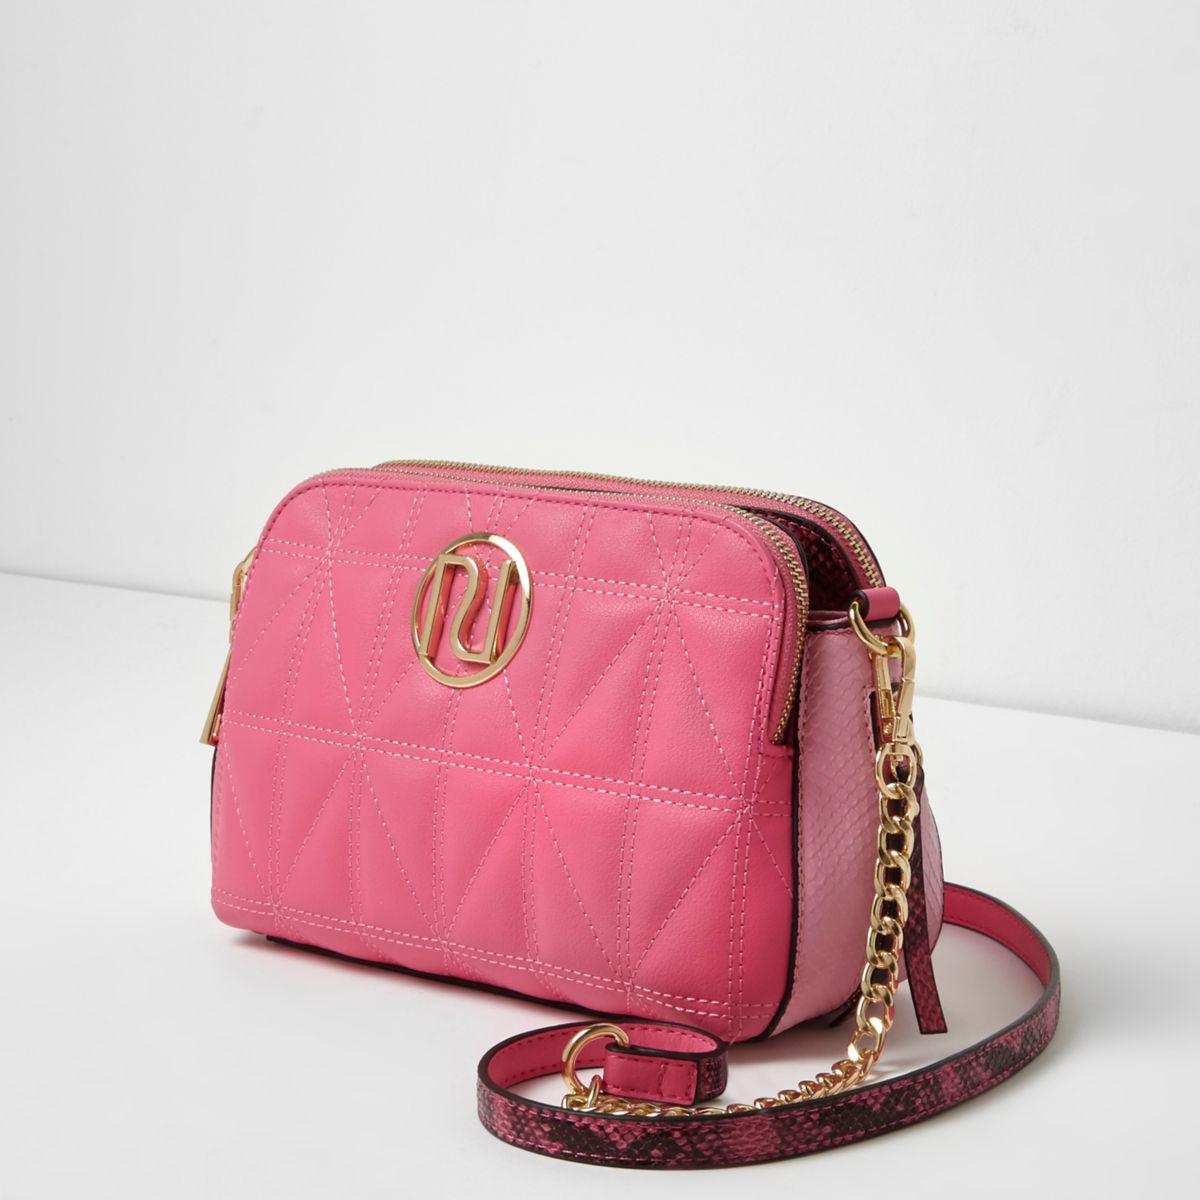 River Island Pink Quilted Chain Cross Body Bag - Lyst